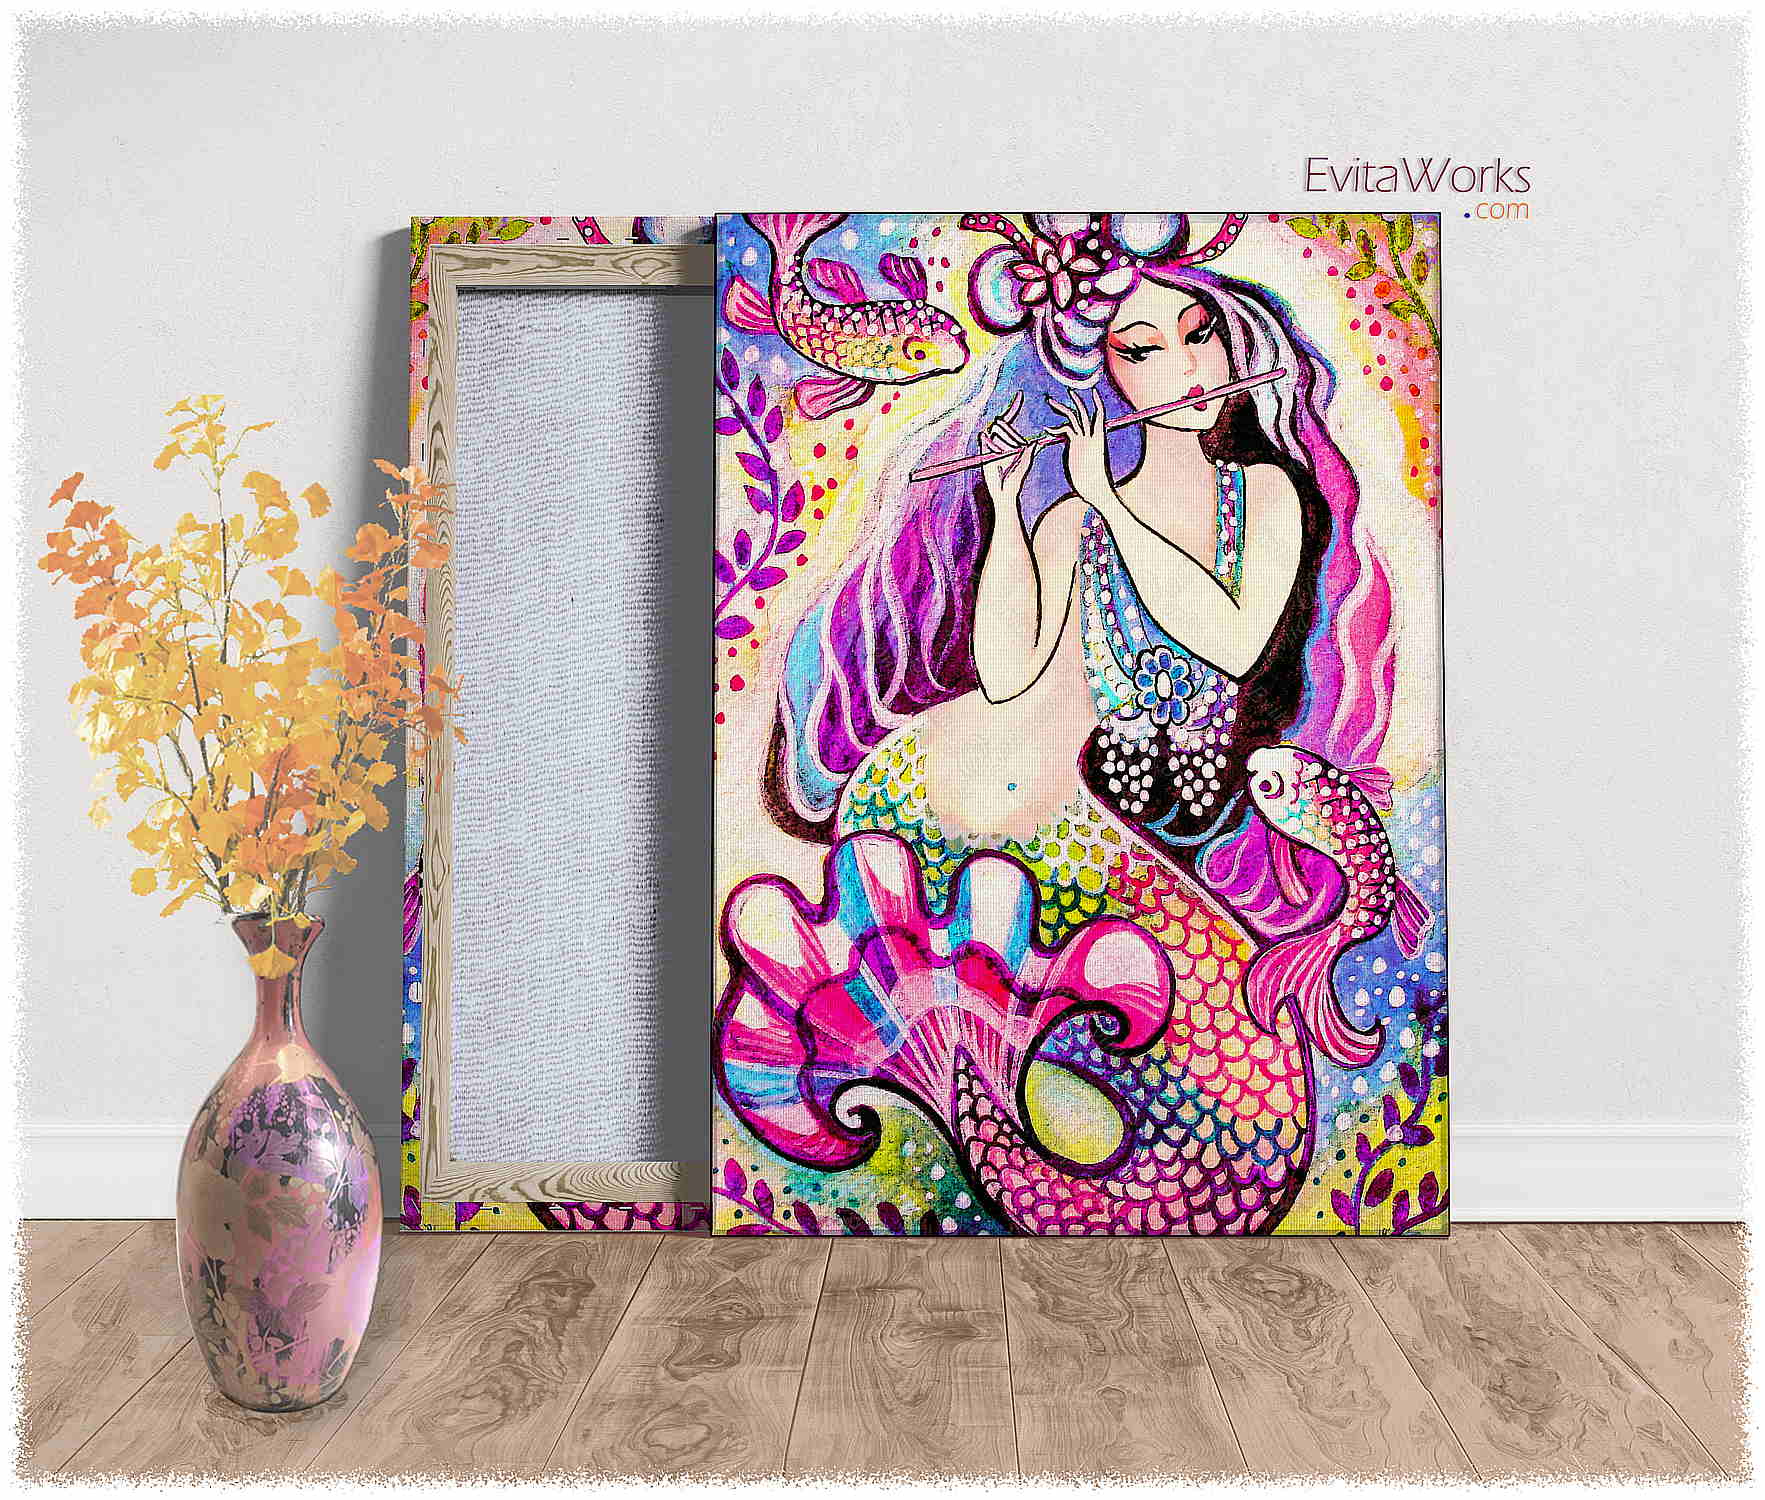 Hit to learn about "East Sea Mermaid, flute, koi fish" on canvases